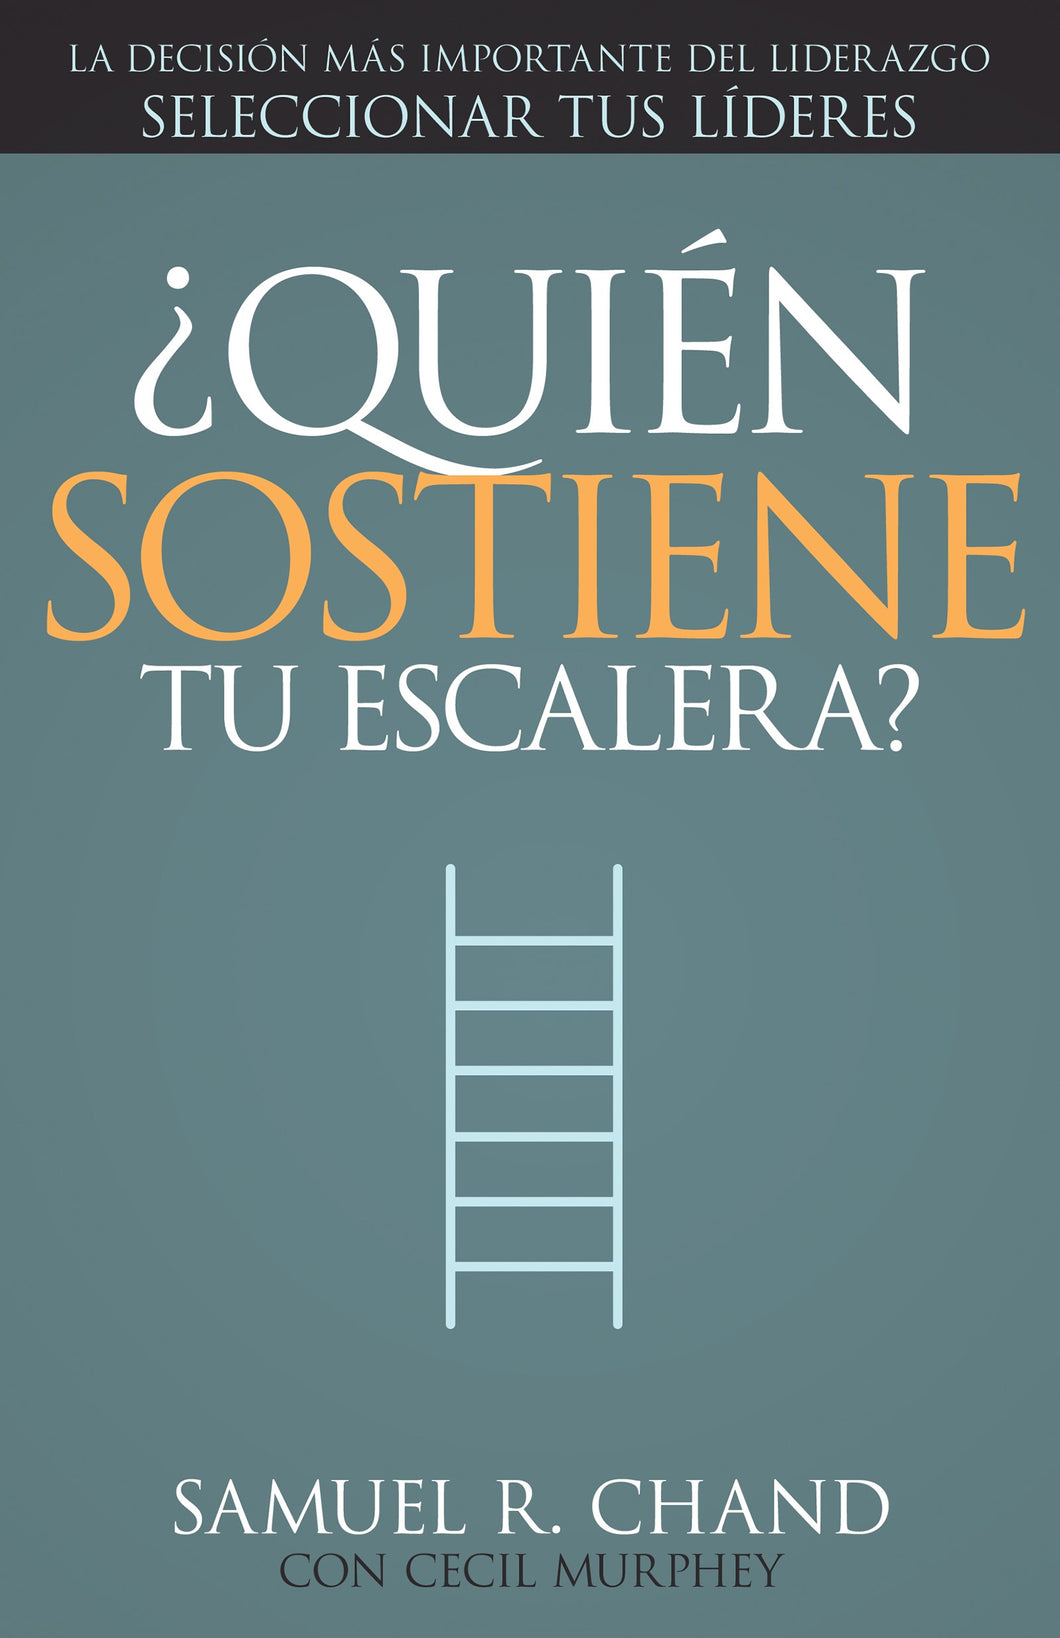 Spanish-Whos Holding Your Ladder